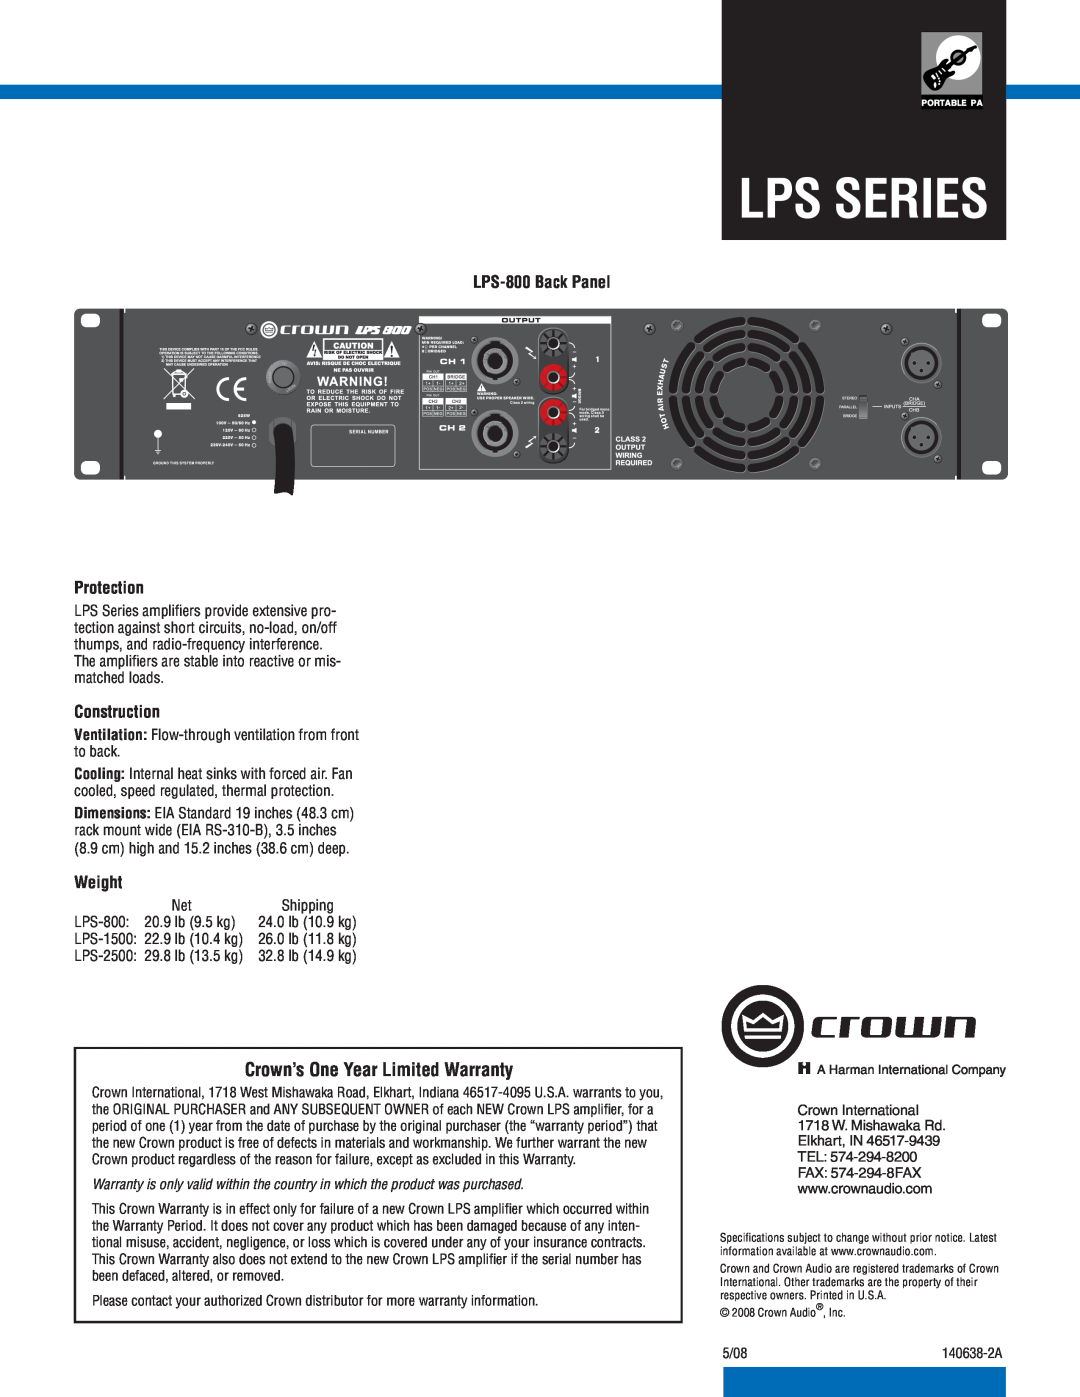 Crown LPS-1500, LPS-2500 Crown’s One Year Limited Warranty, LPS-800Back Panel Protection, Construction, Weight, Lps Series 